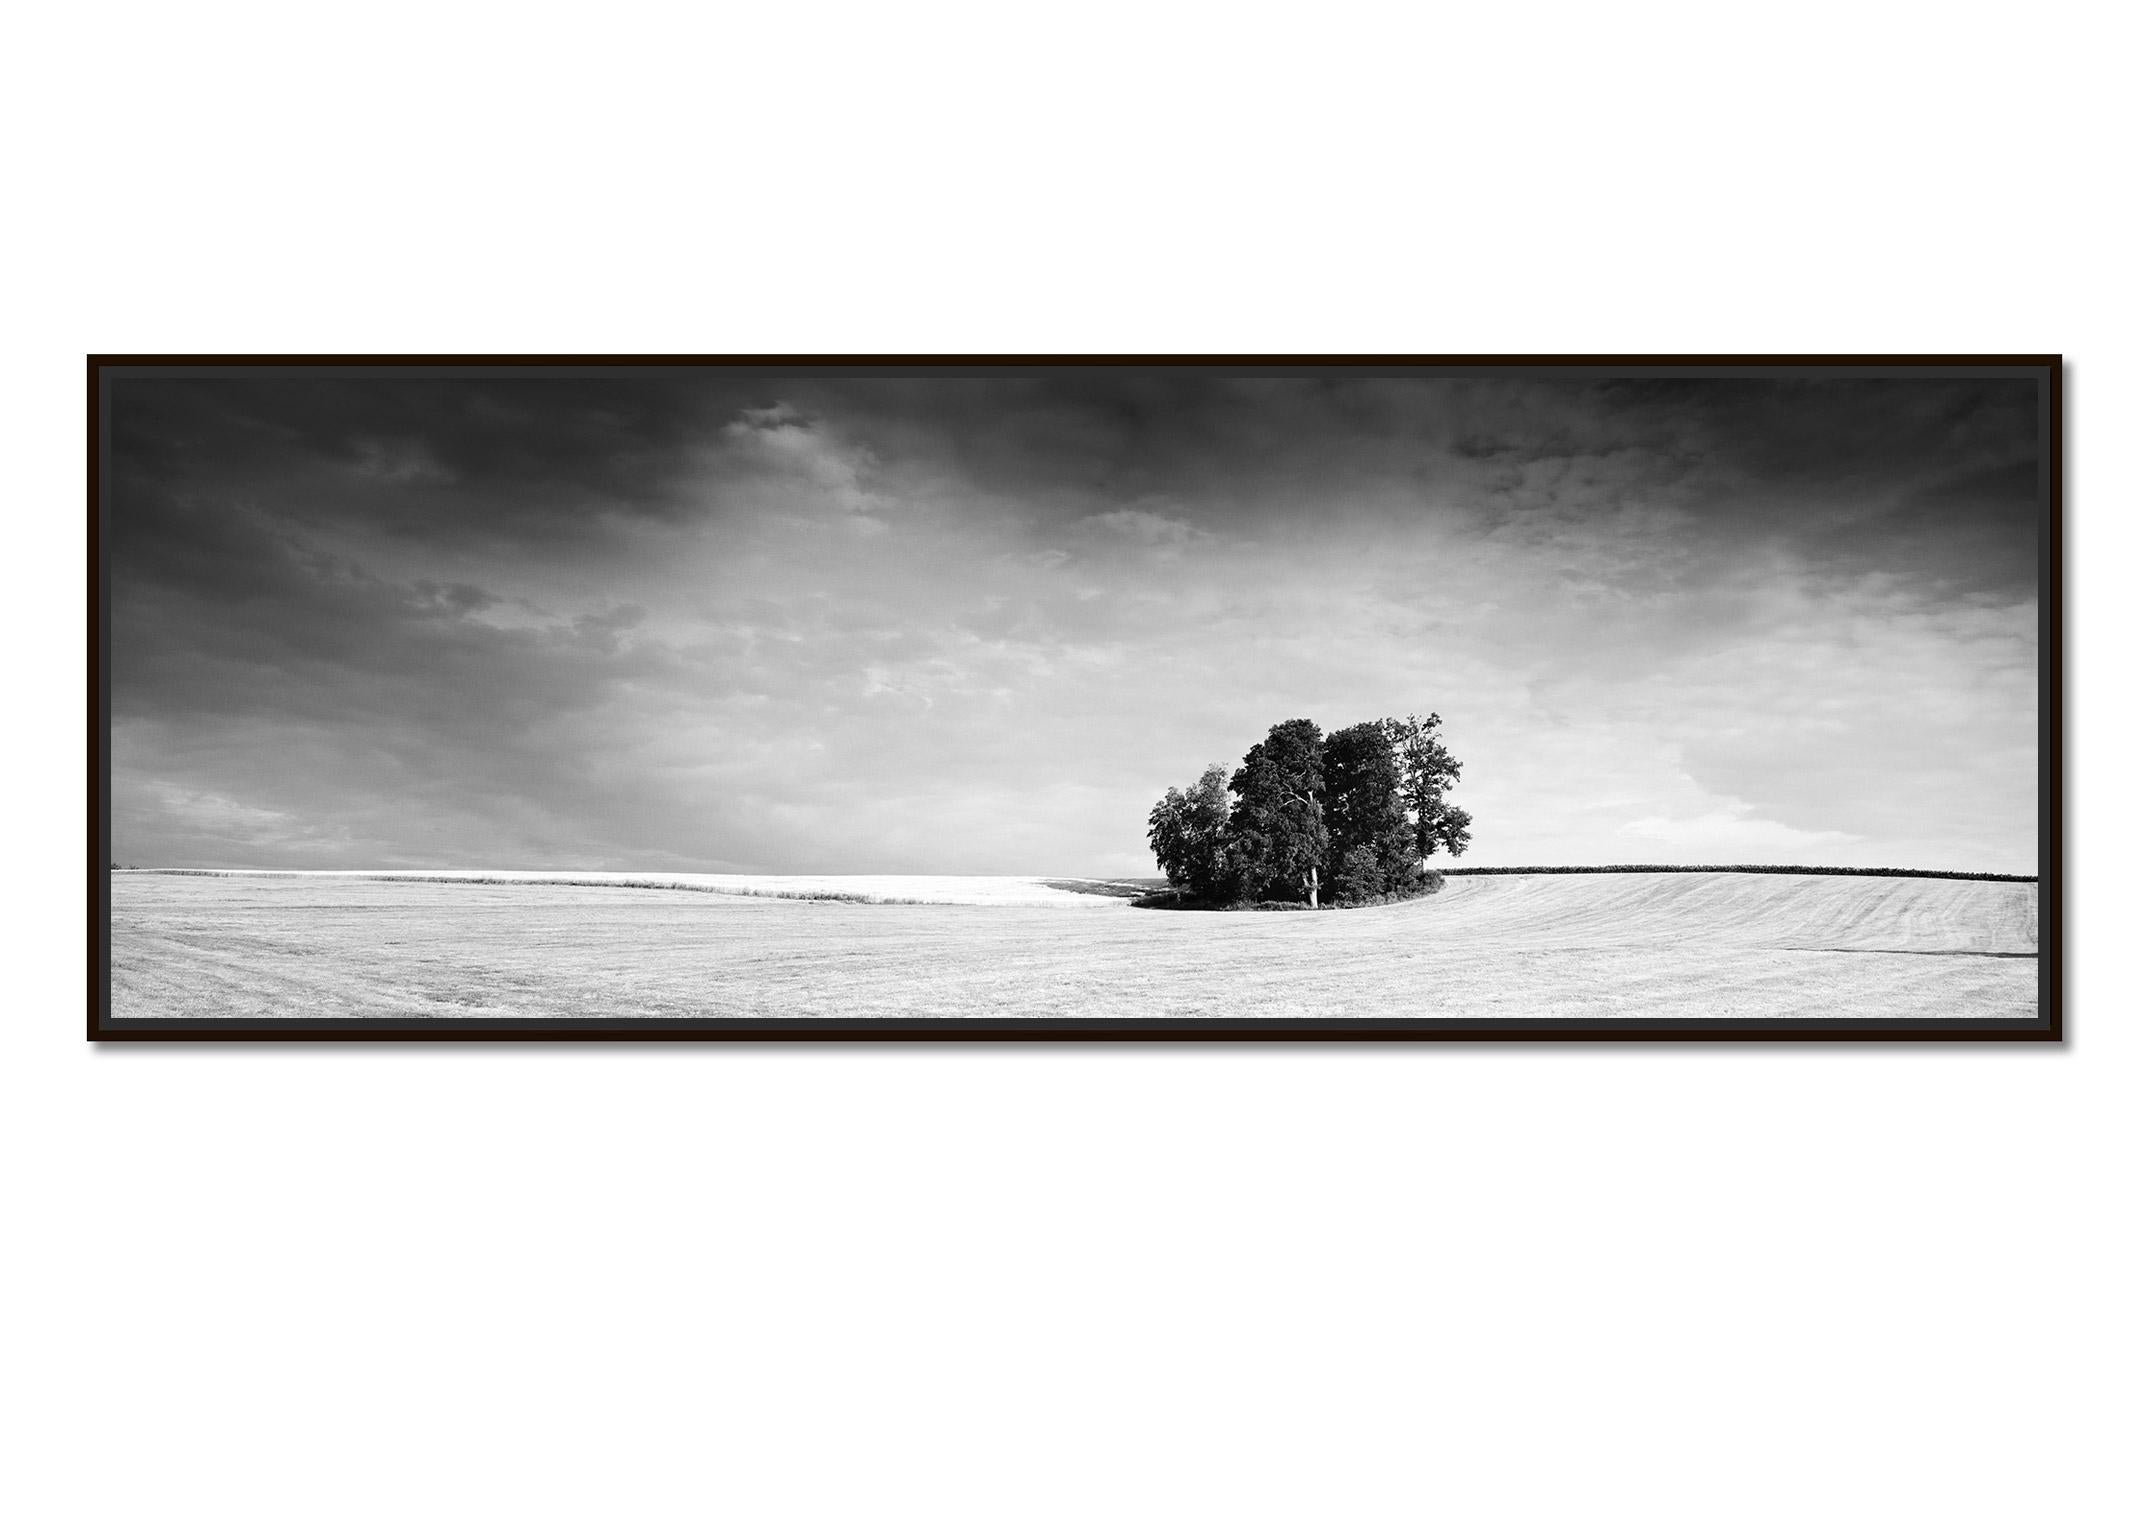 Little Green Island, panorama, black and white, fine art landscape photography - Photograph by Gerald Berghammer